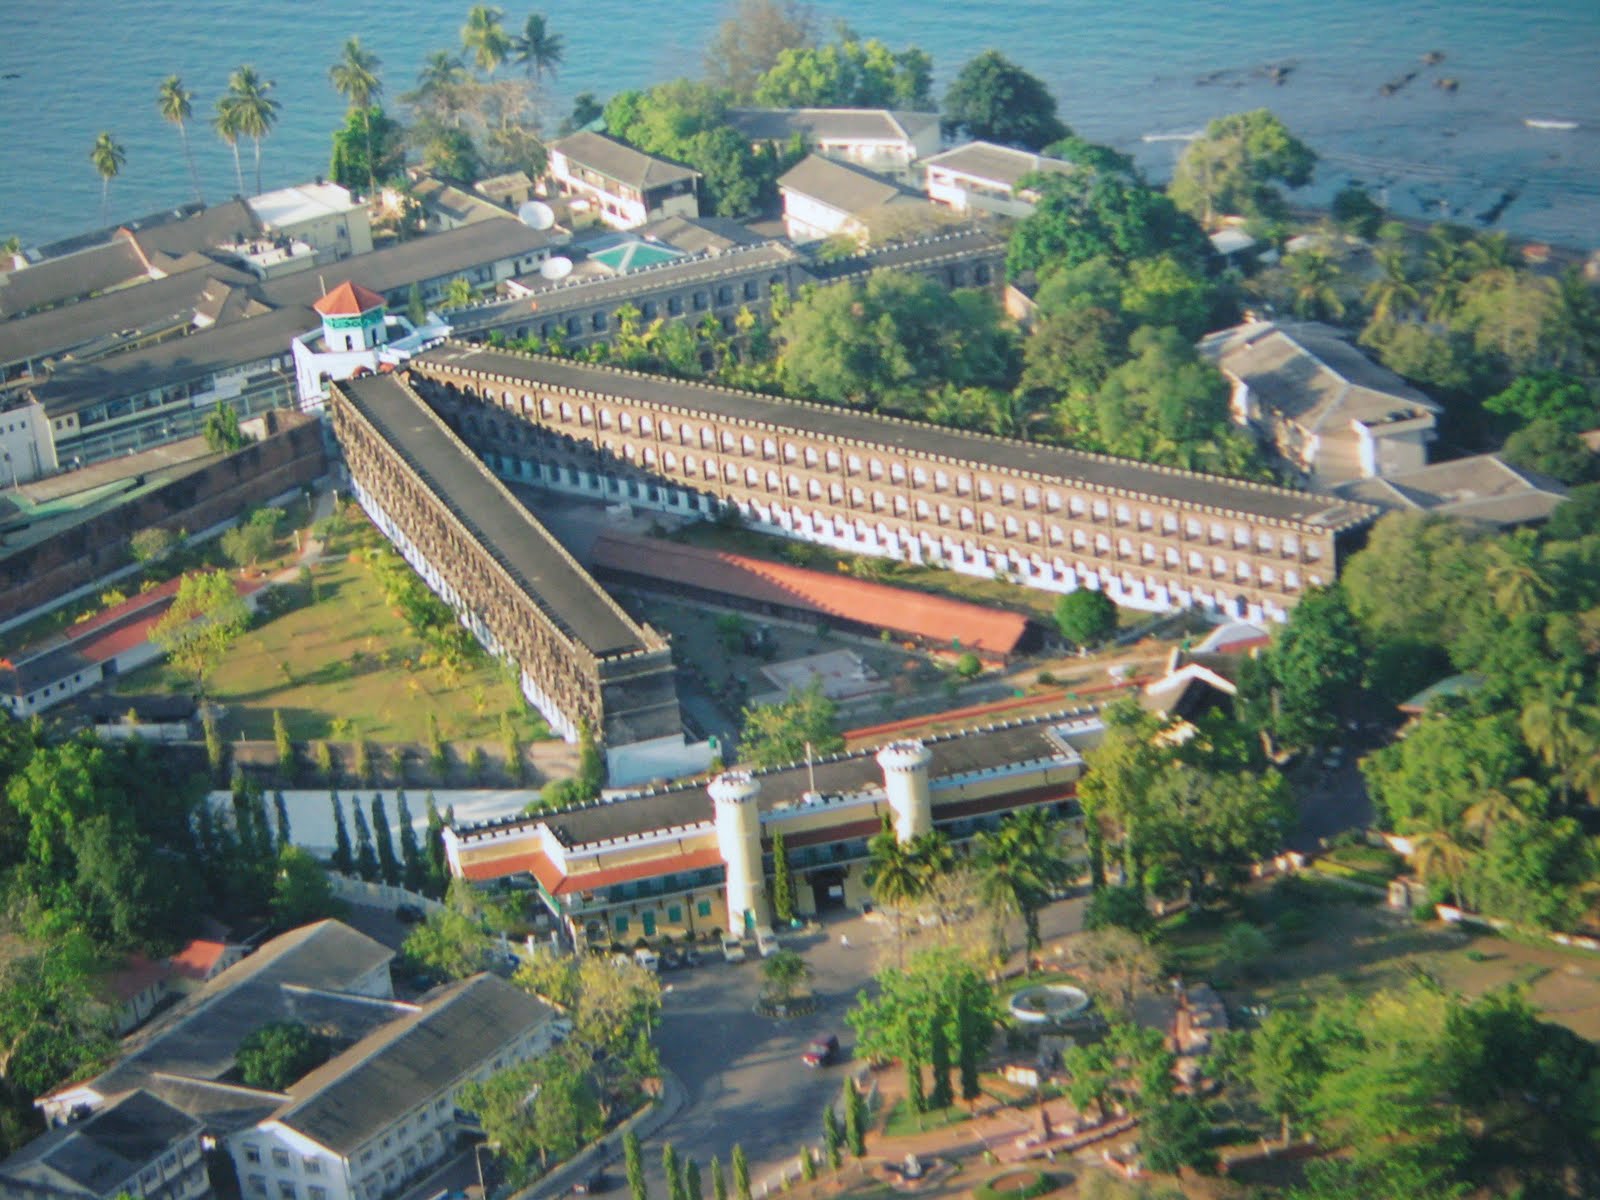 Cellular Jail Historical Facts and Pictures | The History Hub